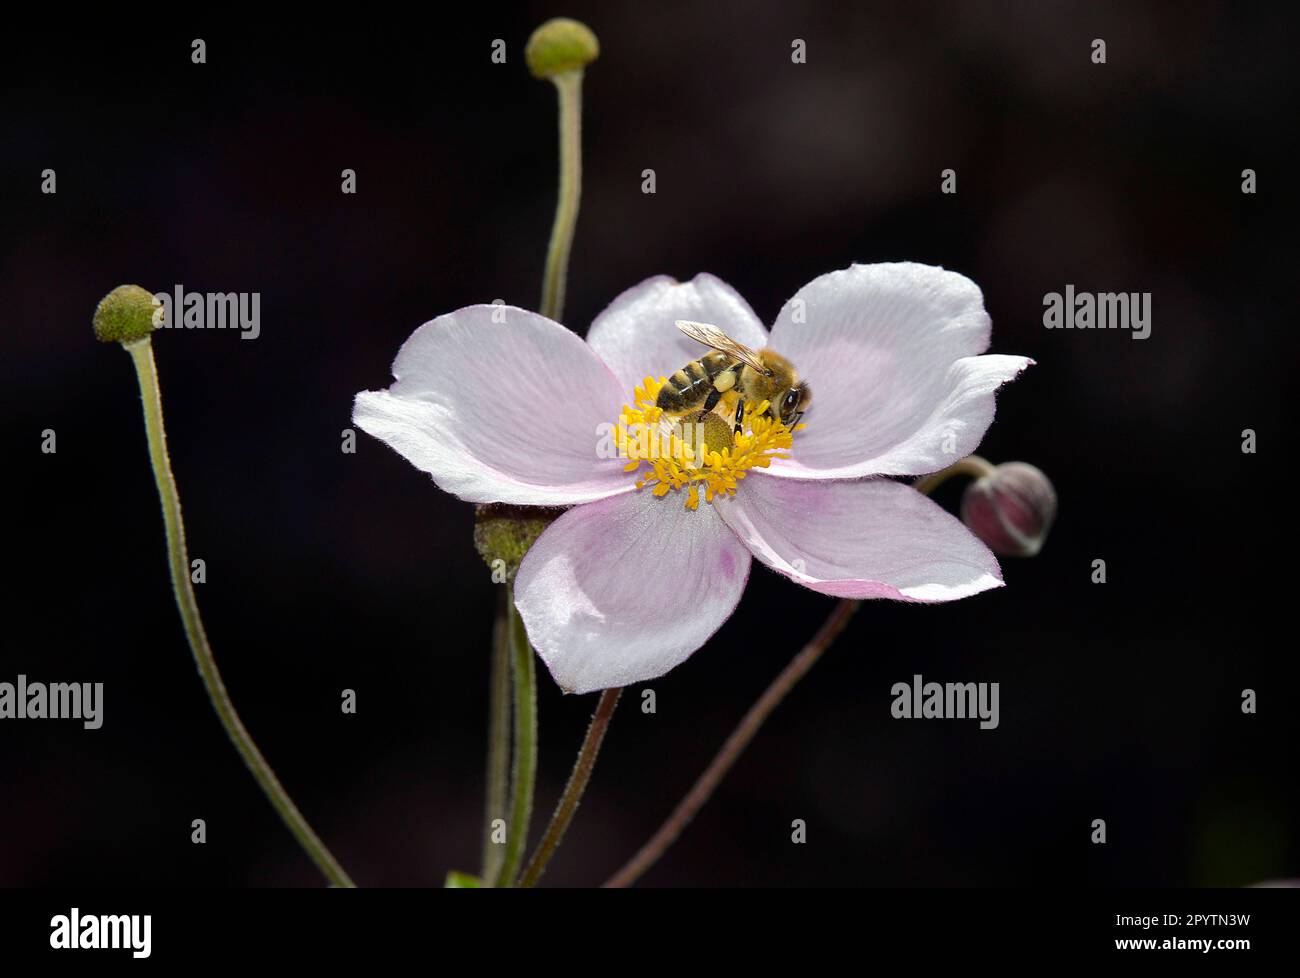 22.08.2017, Unkel, GER, Germany, a bee collects pollen on a flower Stock Photo